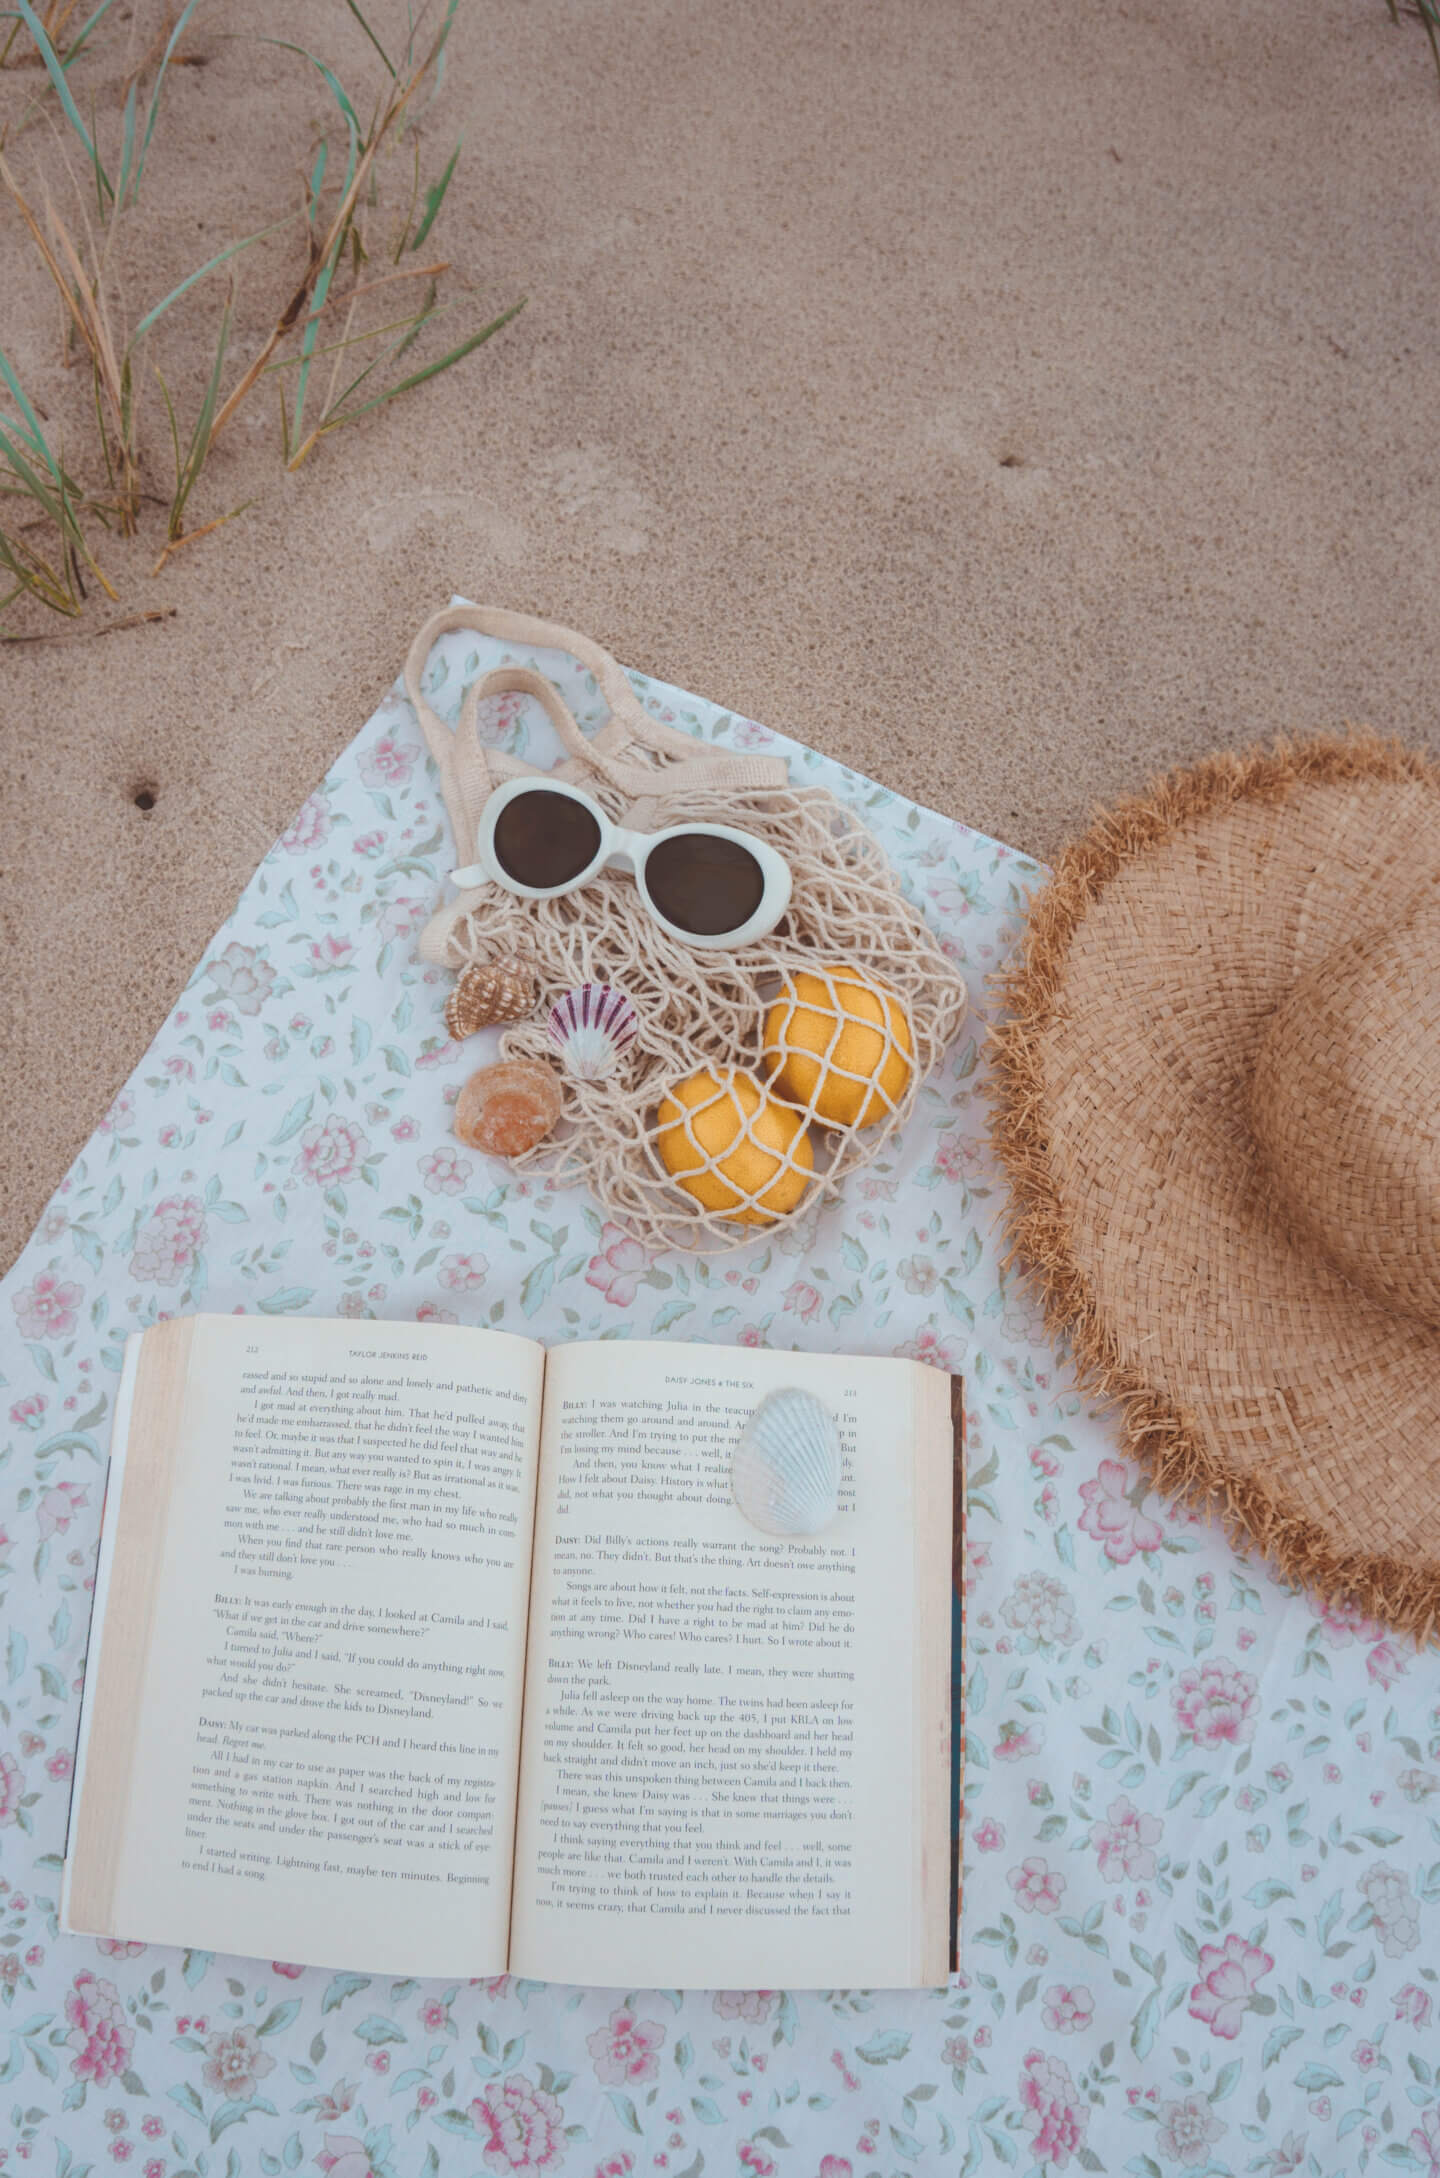 An open travel book on top of a floral beach towel with a hat, sunglasses, and shells